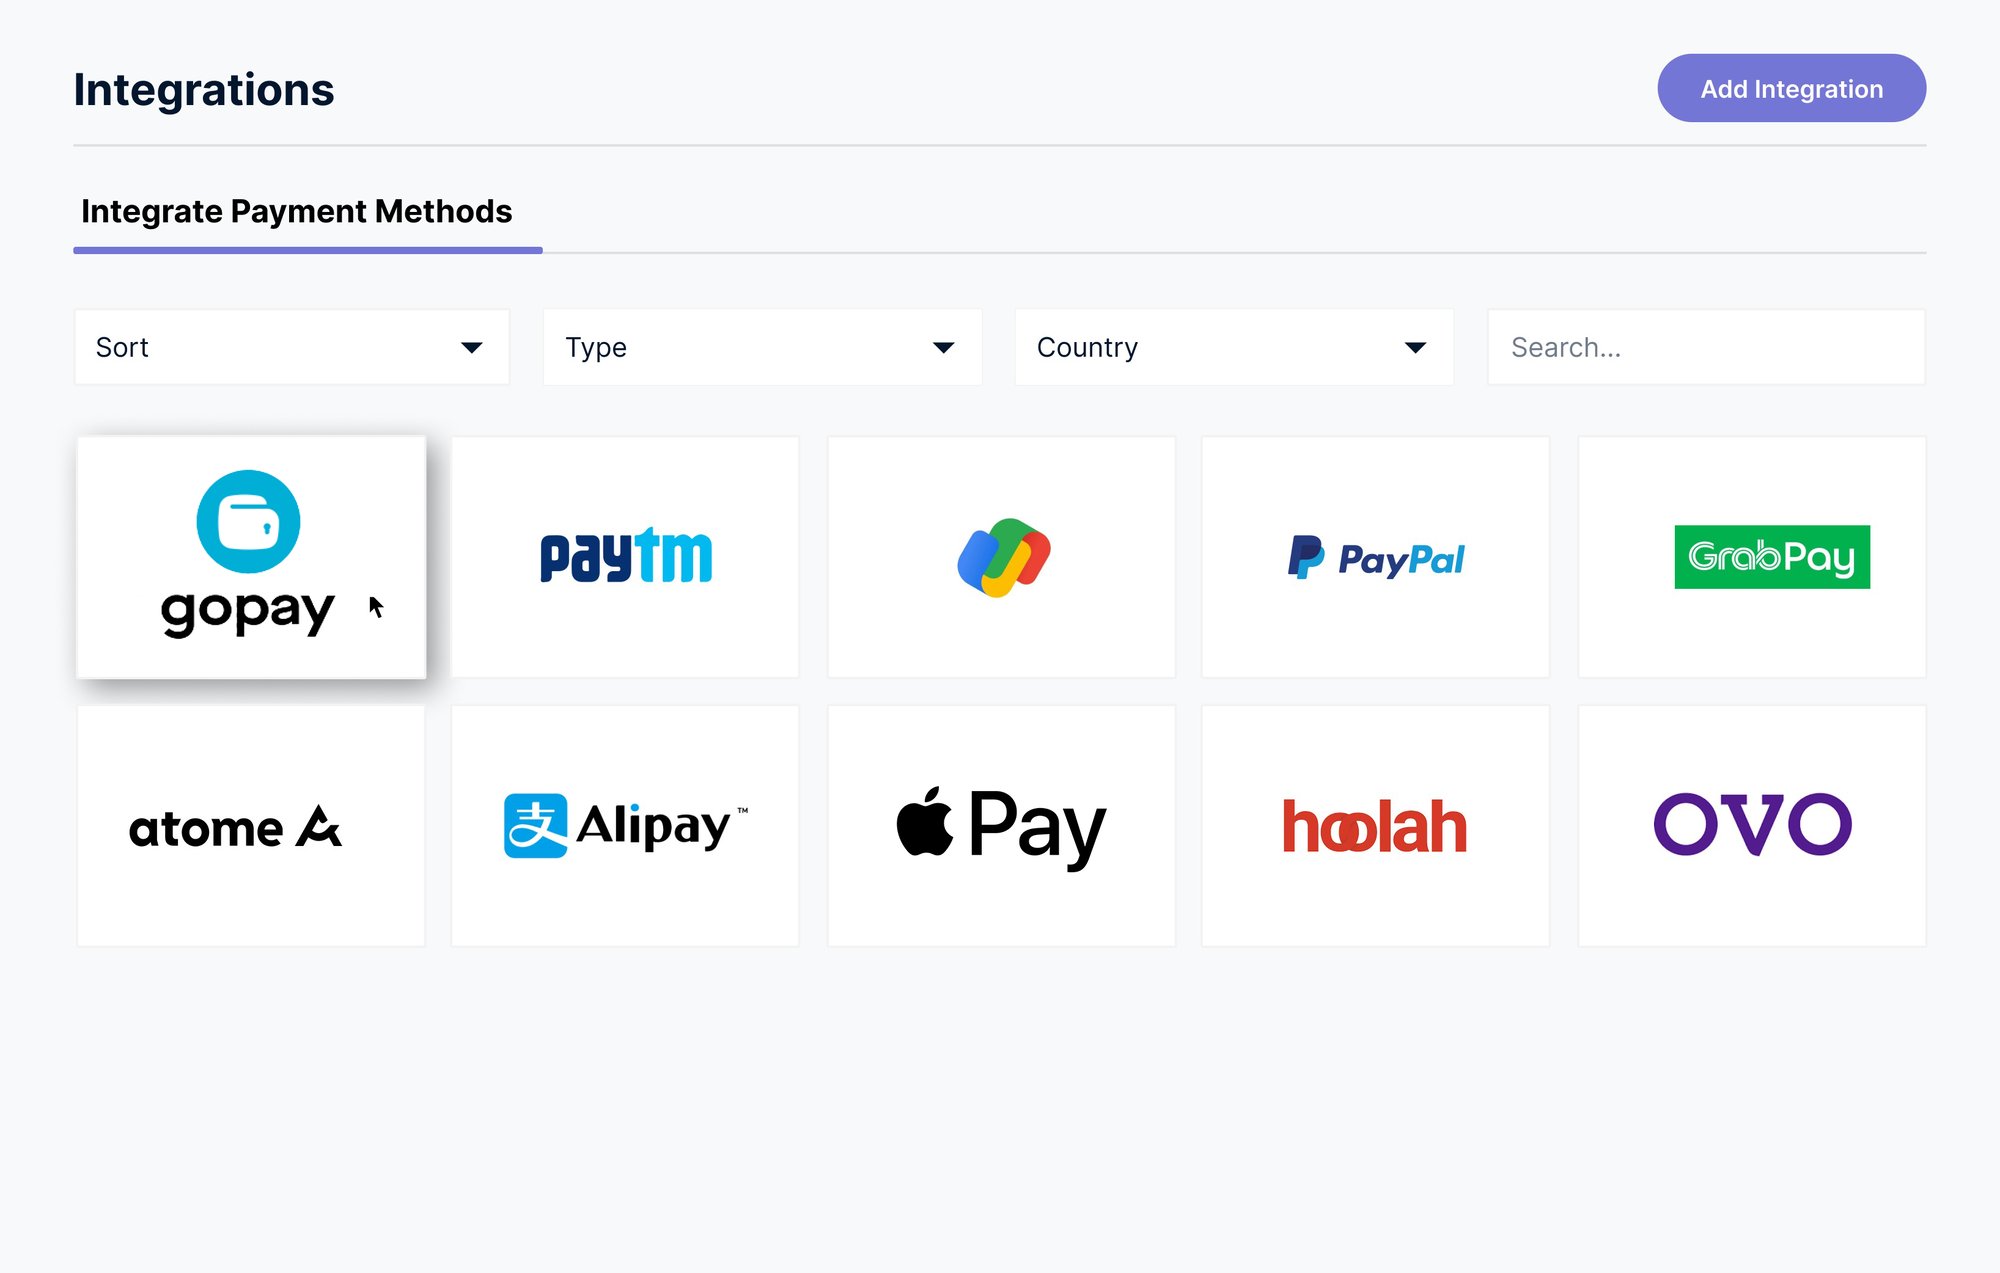 Integrate with gopay